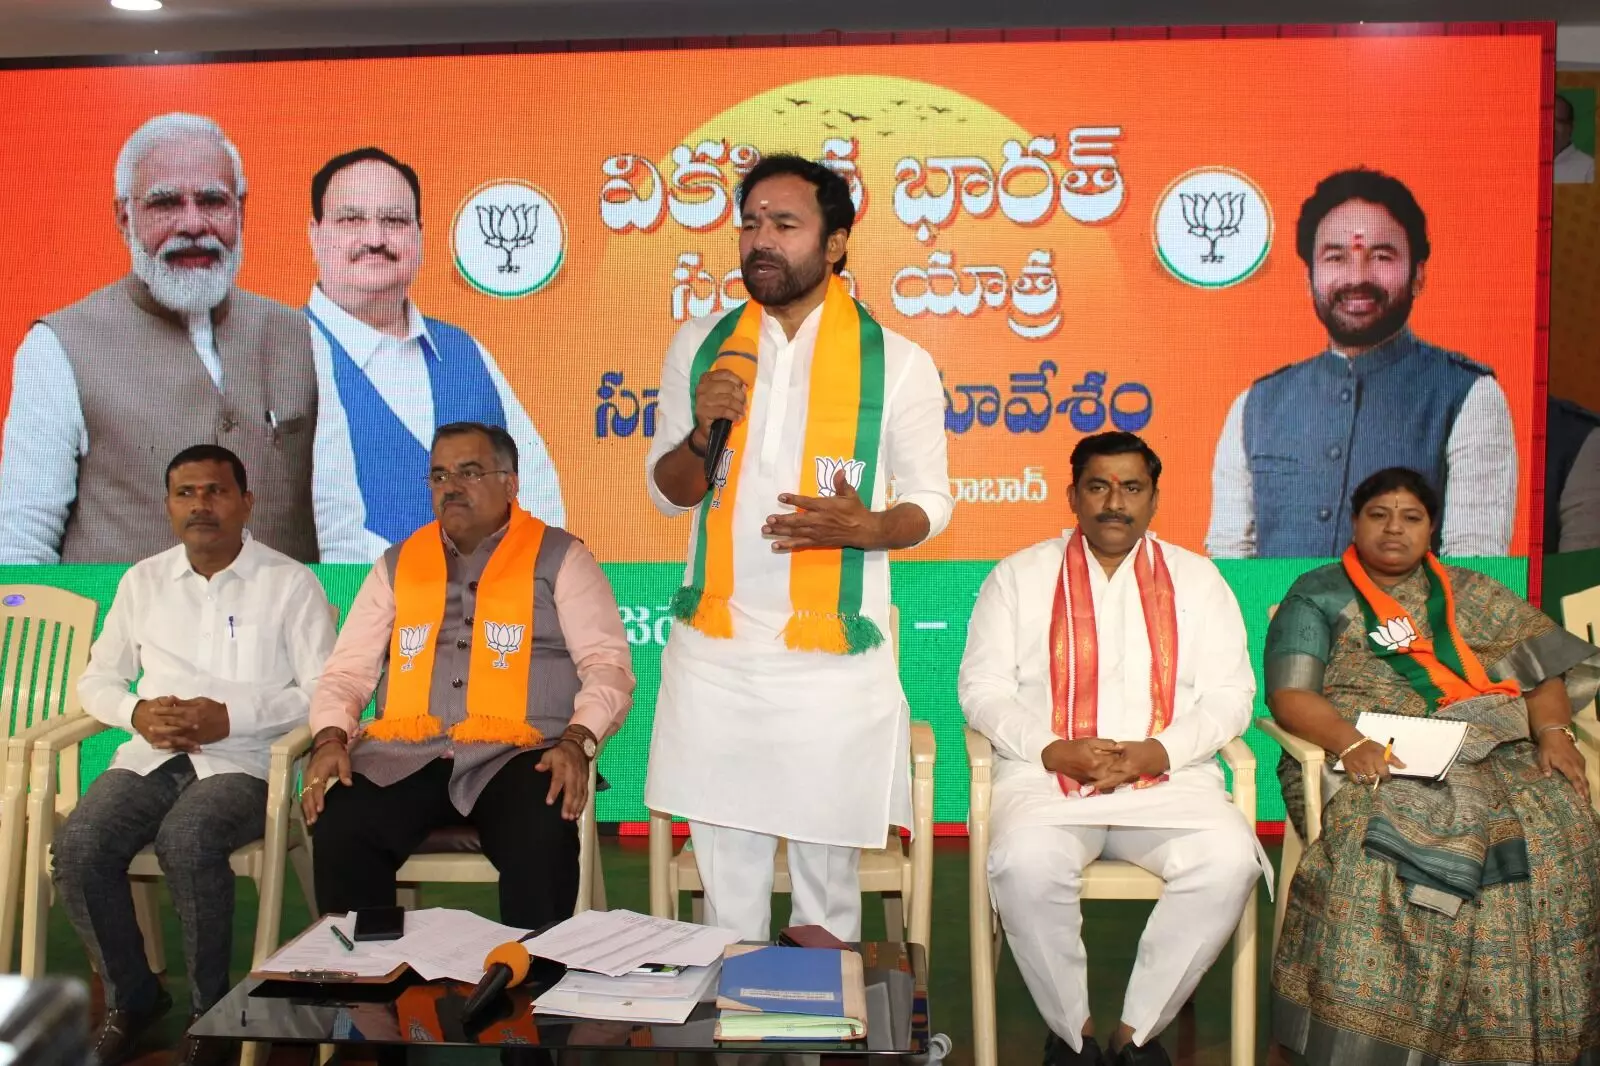 BJP to contest alone in Telangana in Lok Sabha elections, no truck with BRS, says Kishan Reddy